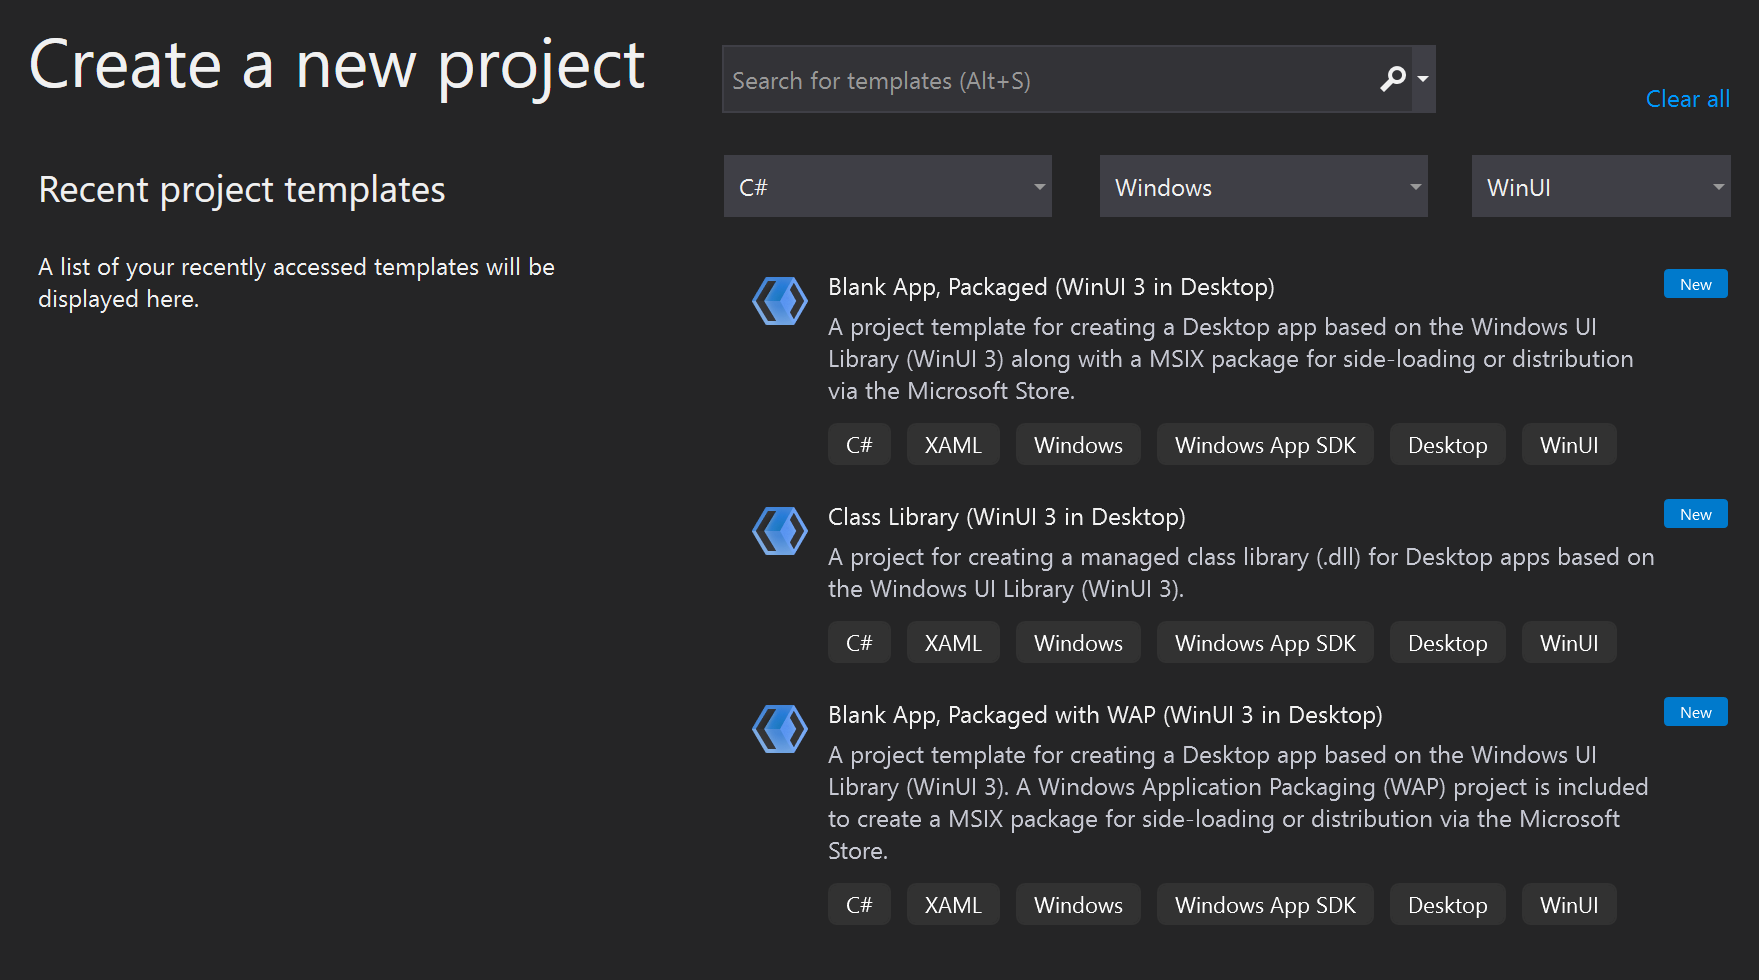 Screenshot of Create a new project wizard with the Blank App Packaged (Win UI in Desktop) option highlighted.